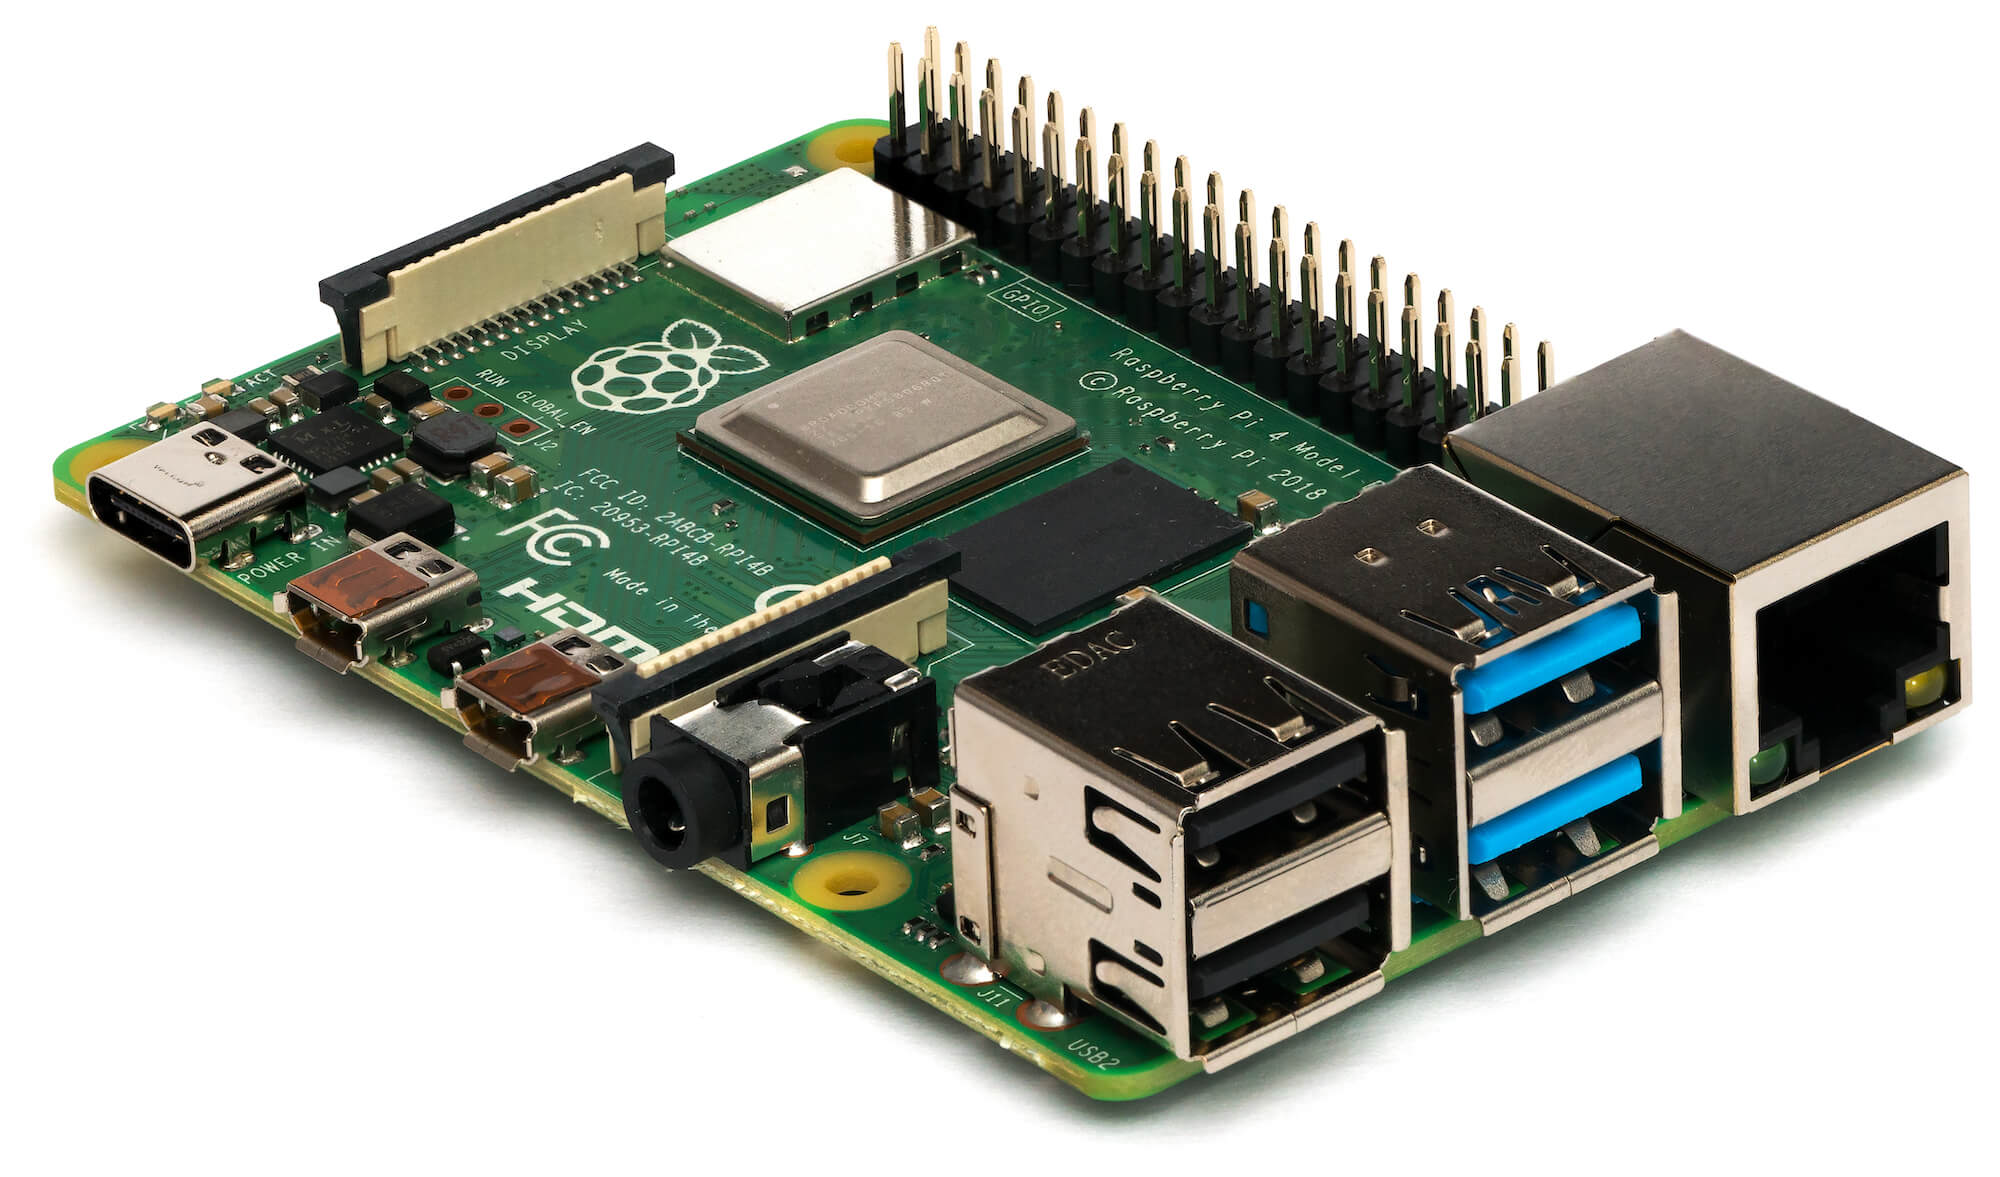 Raspberry Pi 400 review—the under-$100 desktop PC you didn't know